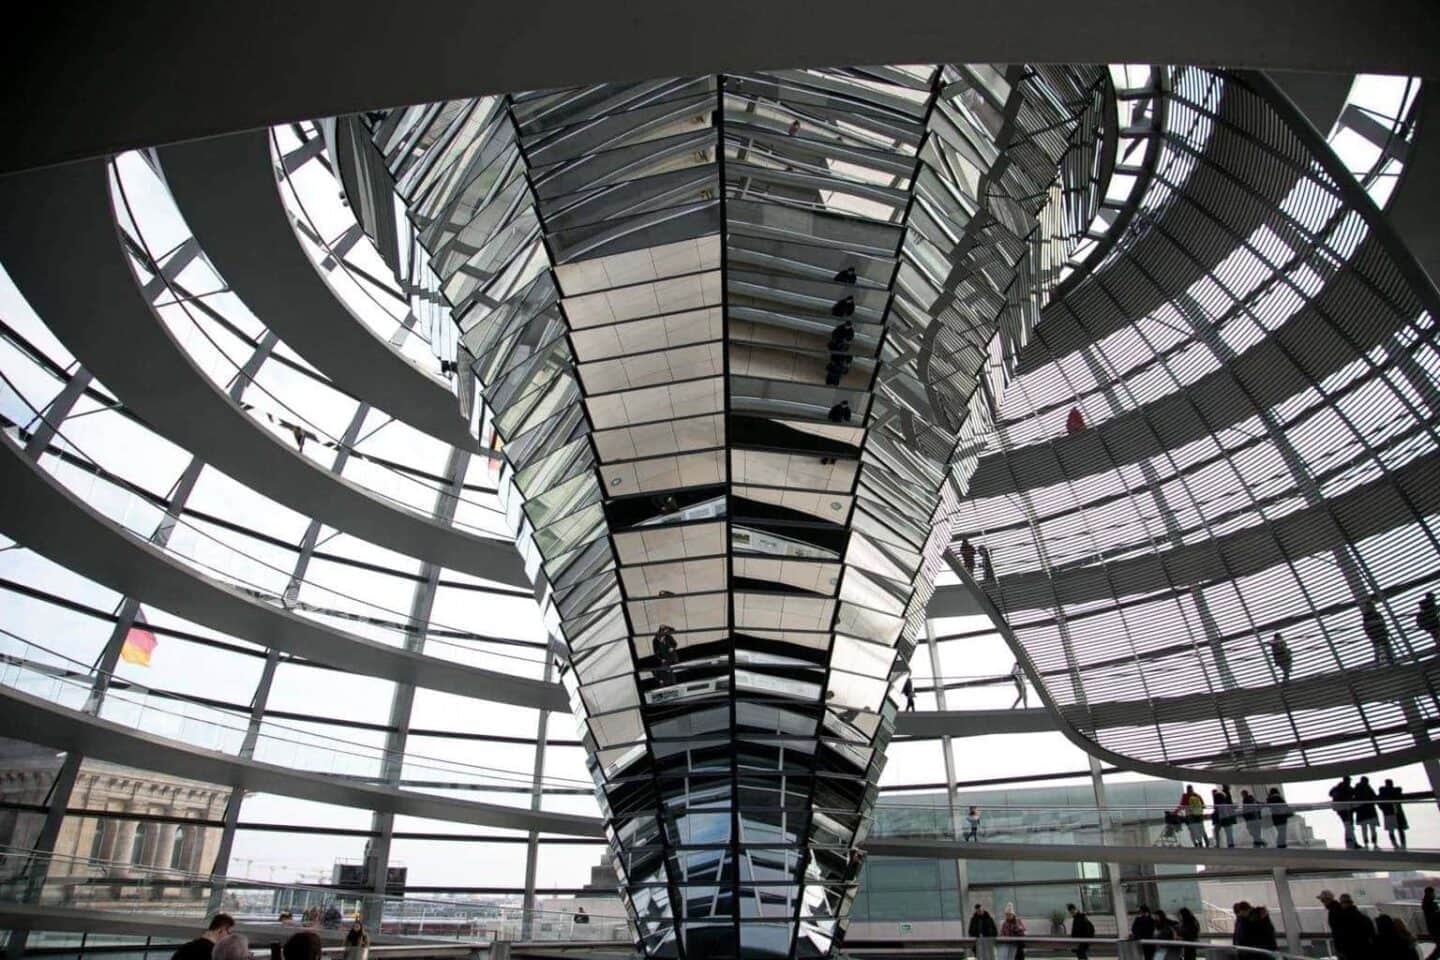 Reichstag Dome with Kids